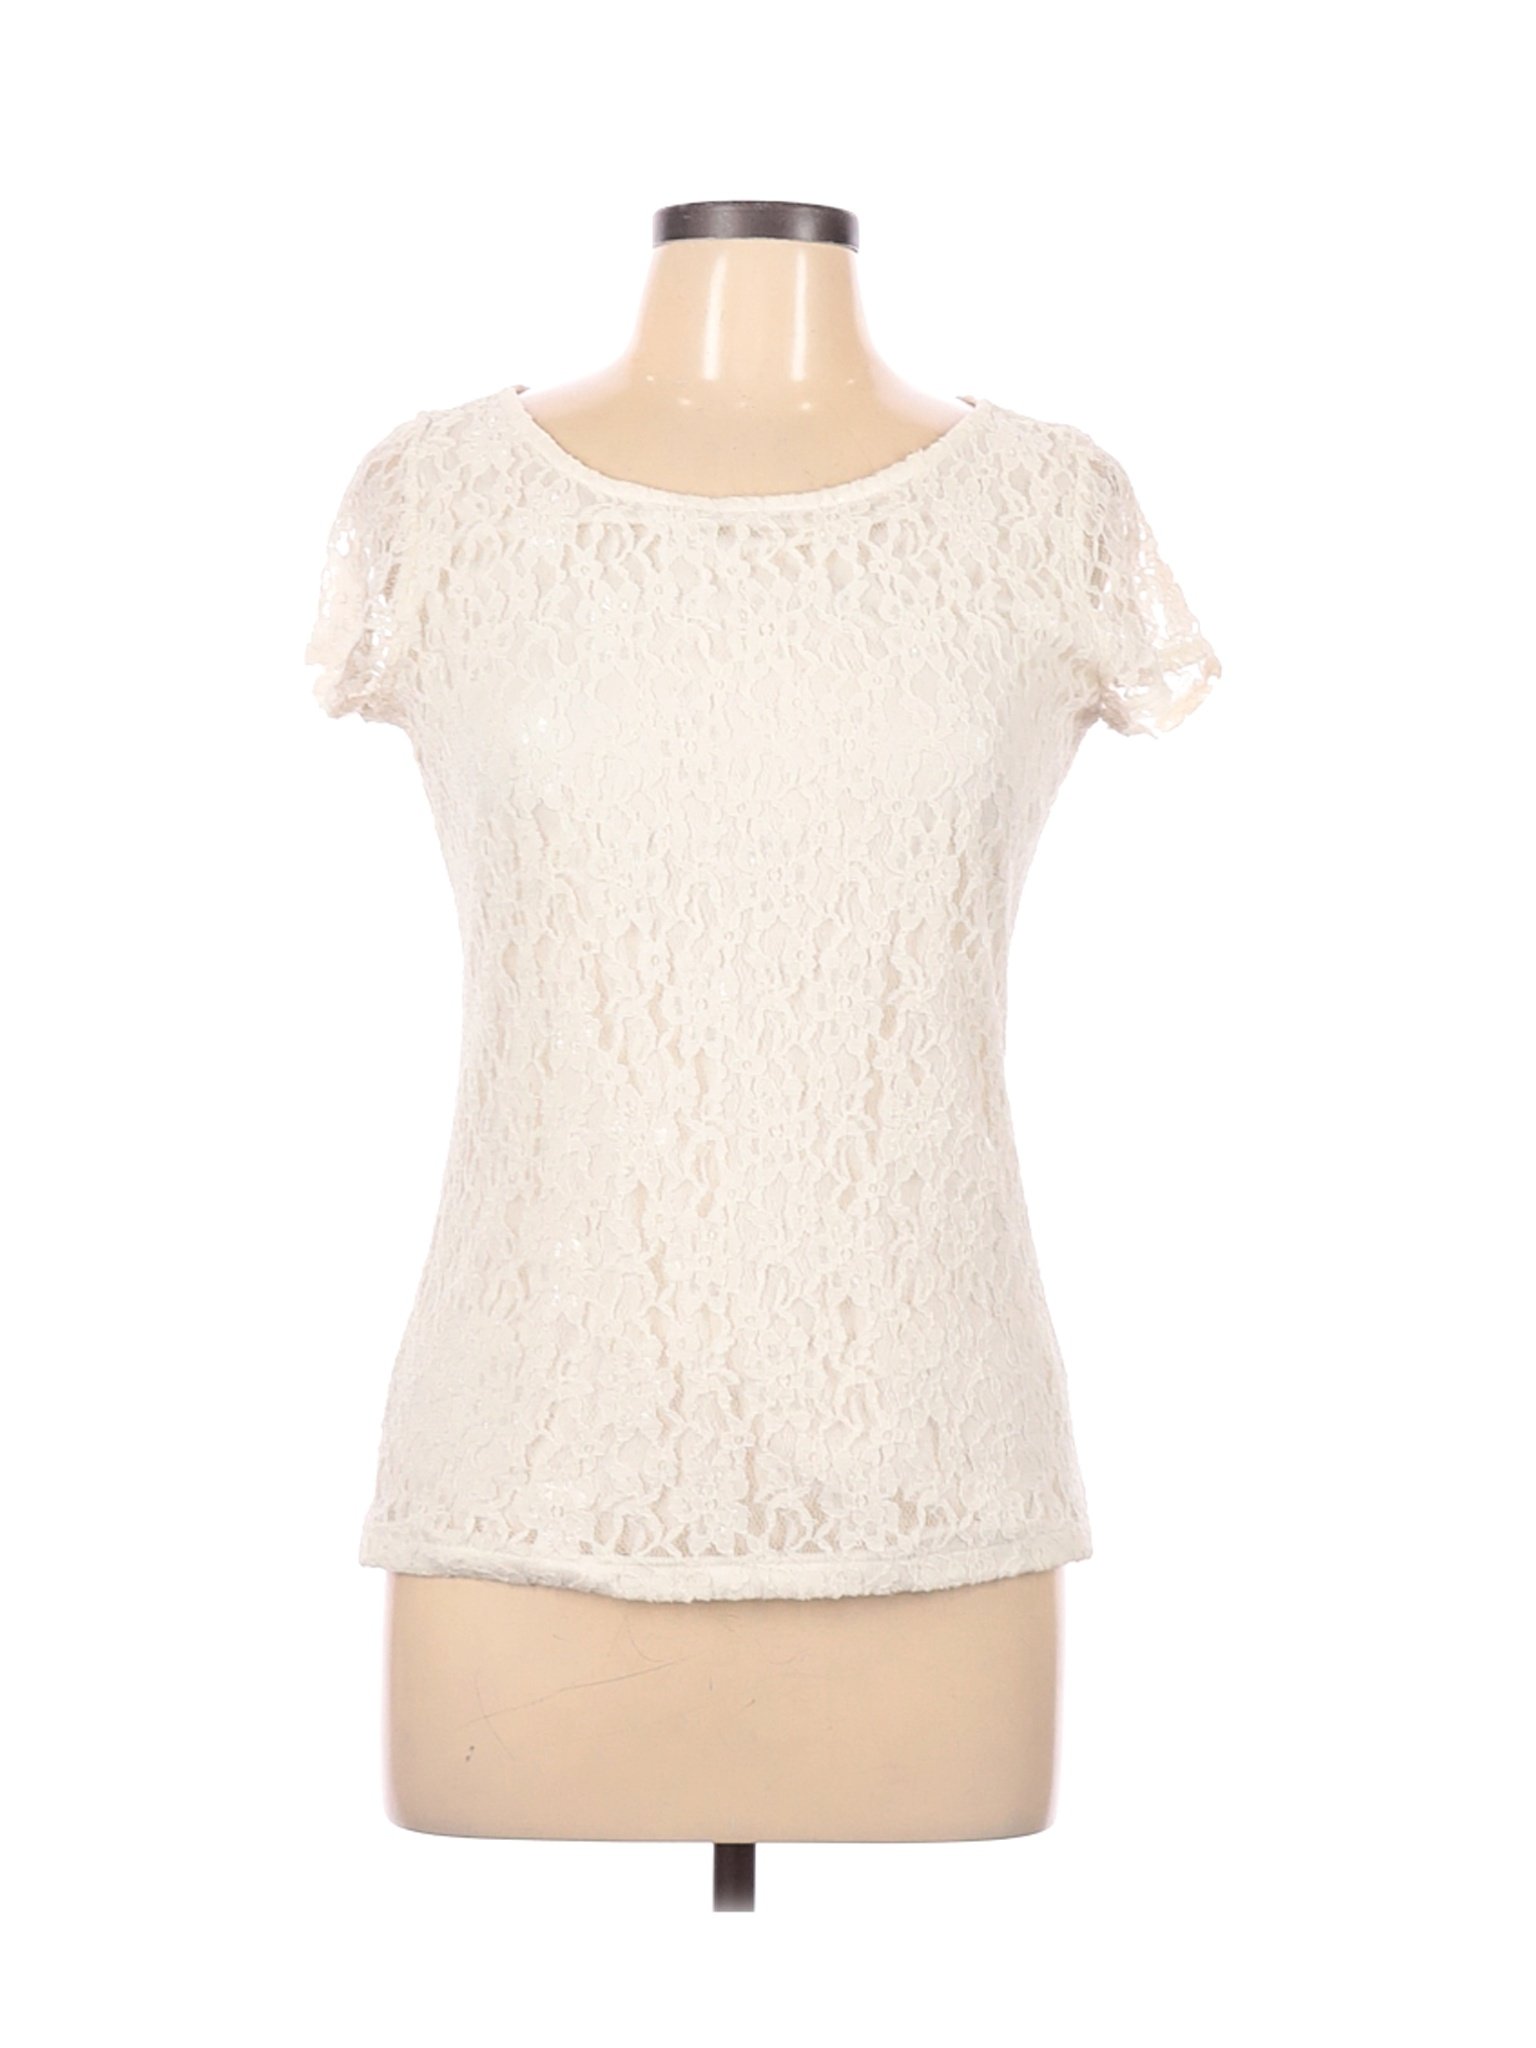 The Limited Women Ivory Short Sleeve Top M | eBay